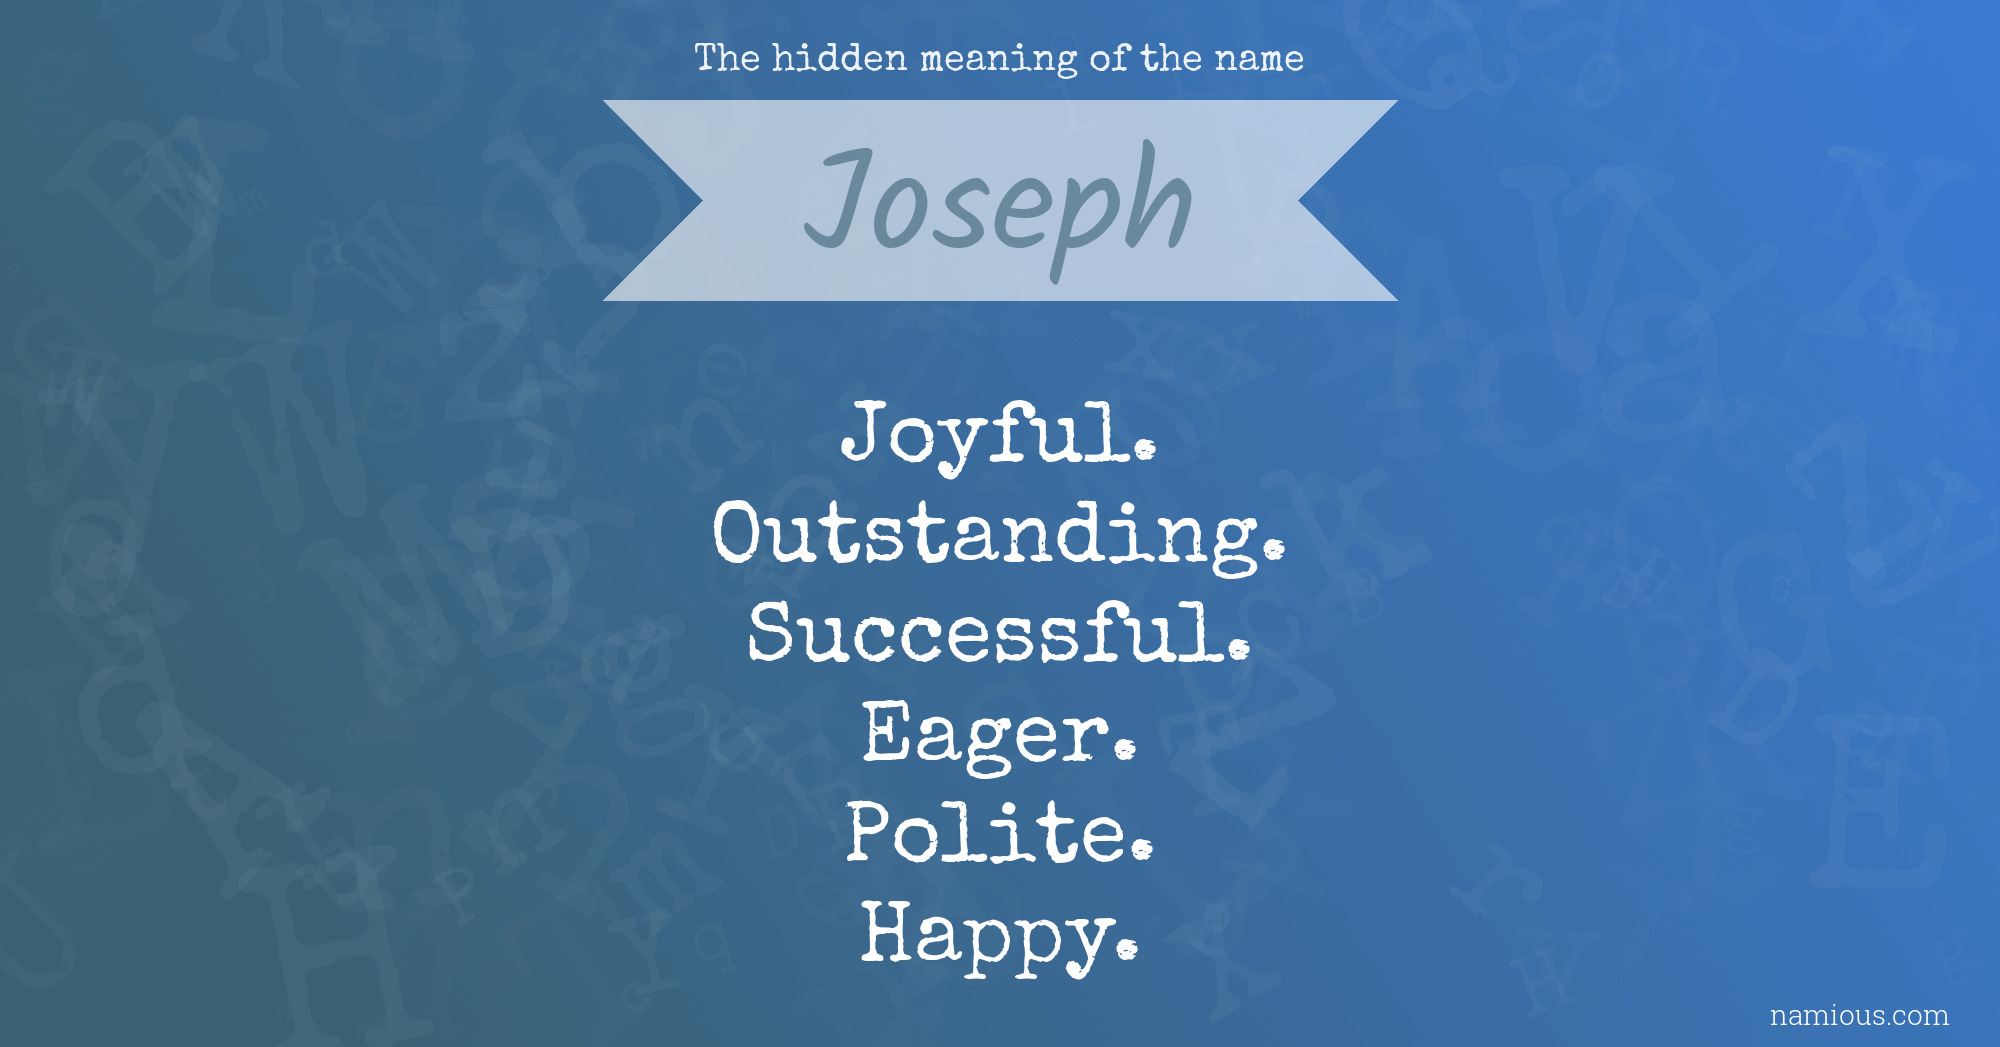 The hidden meaning of the name Joseph